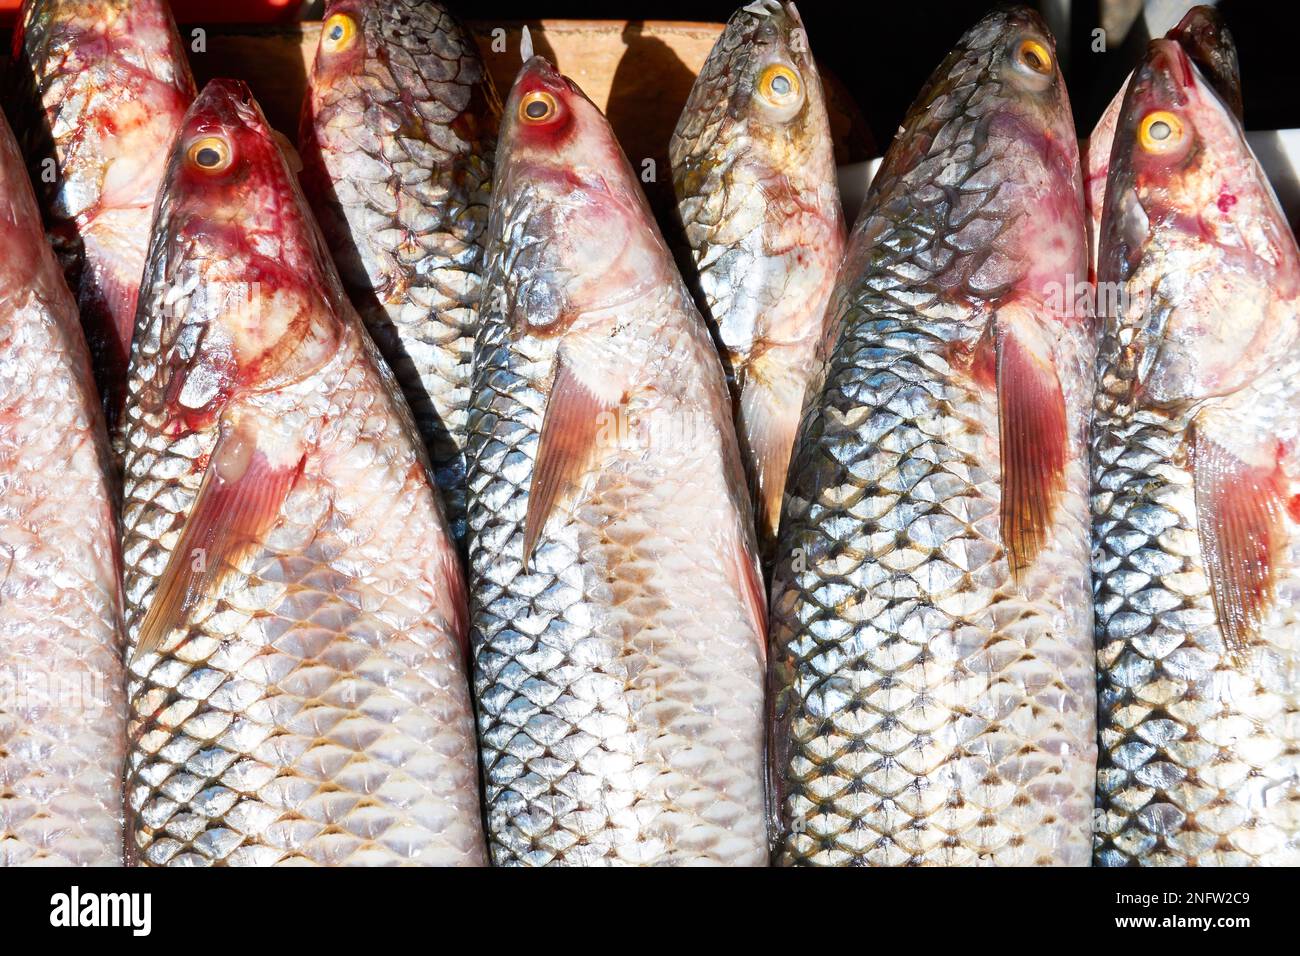 So-iuy mullet from Black Sea in market Stock Photo